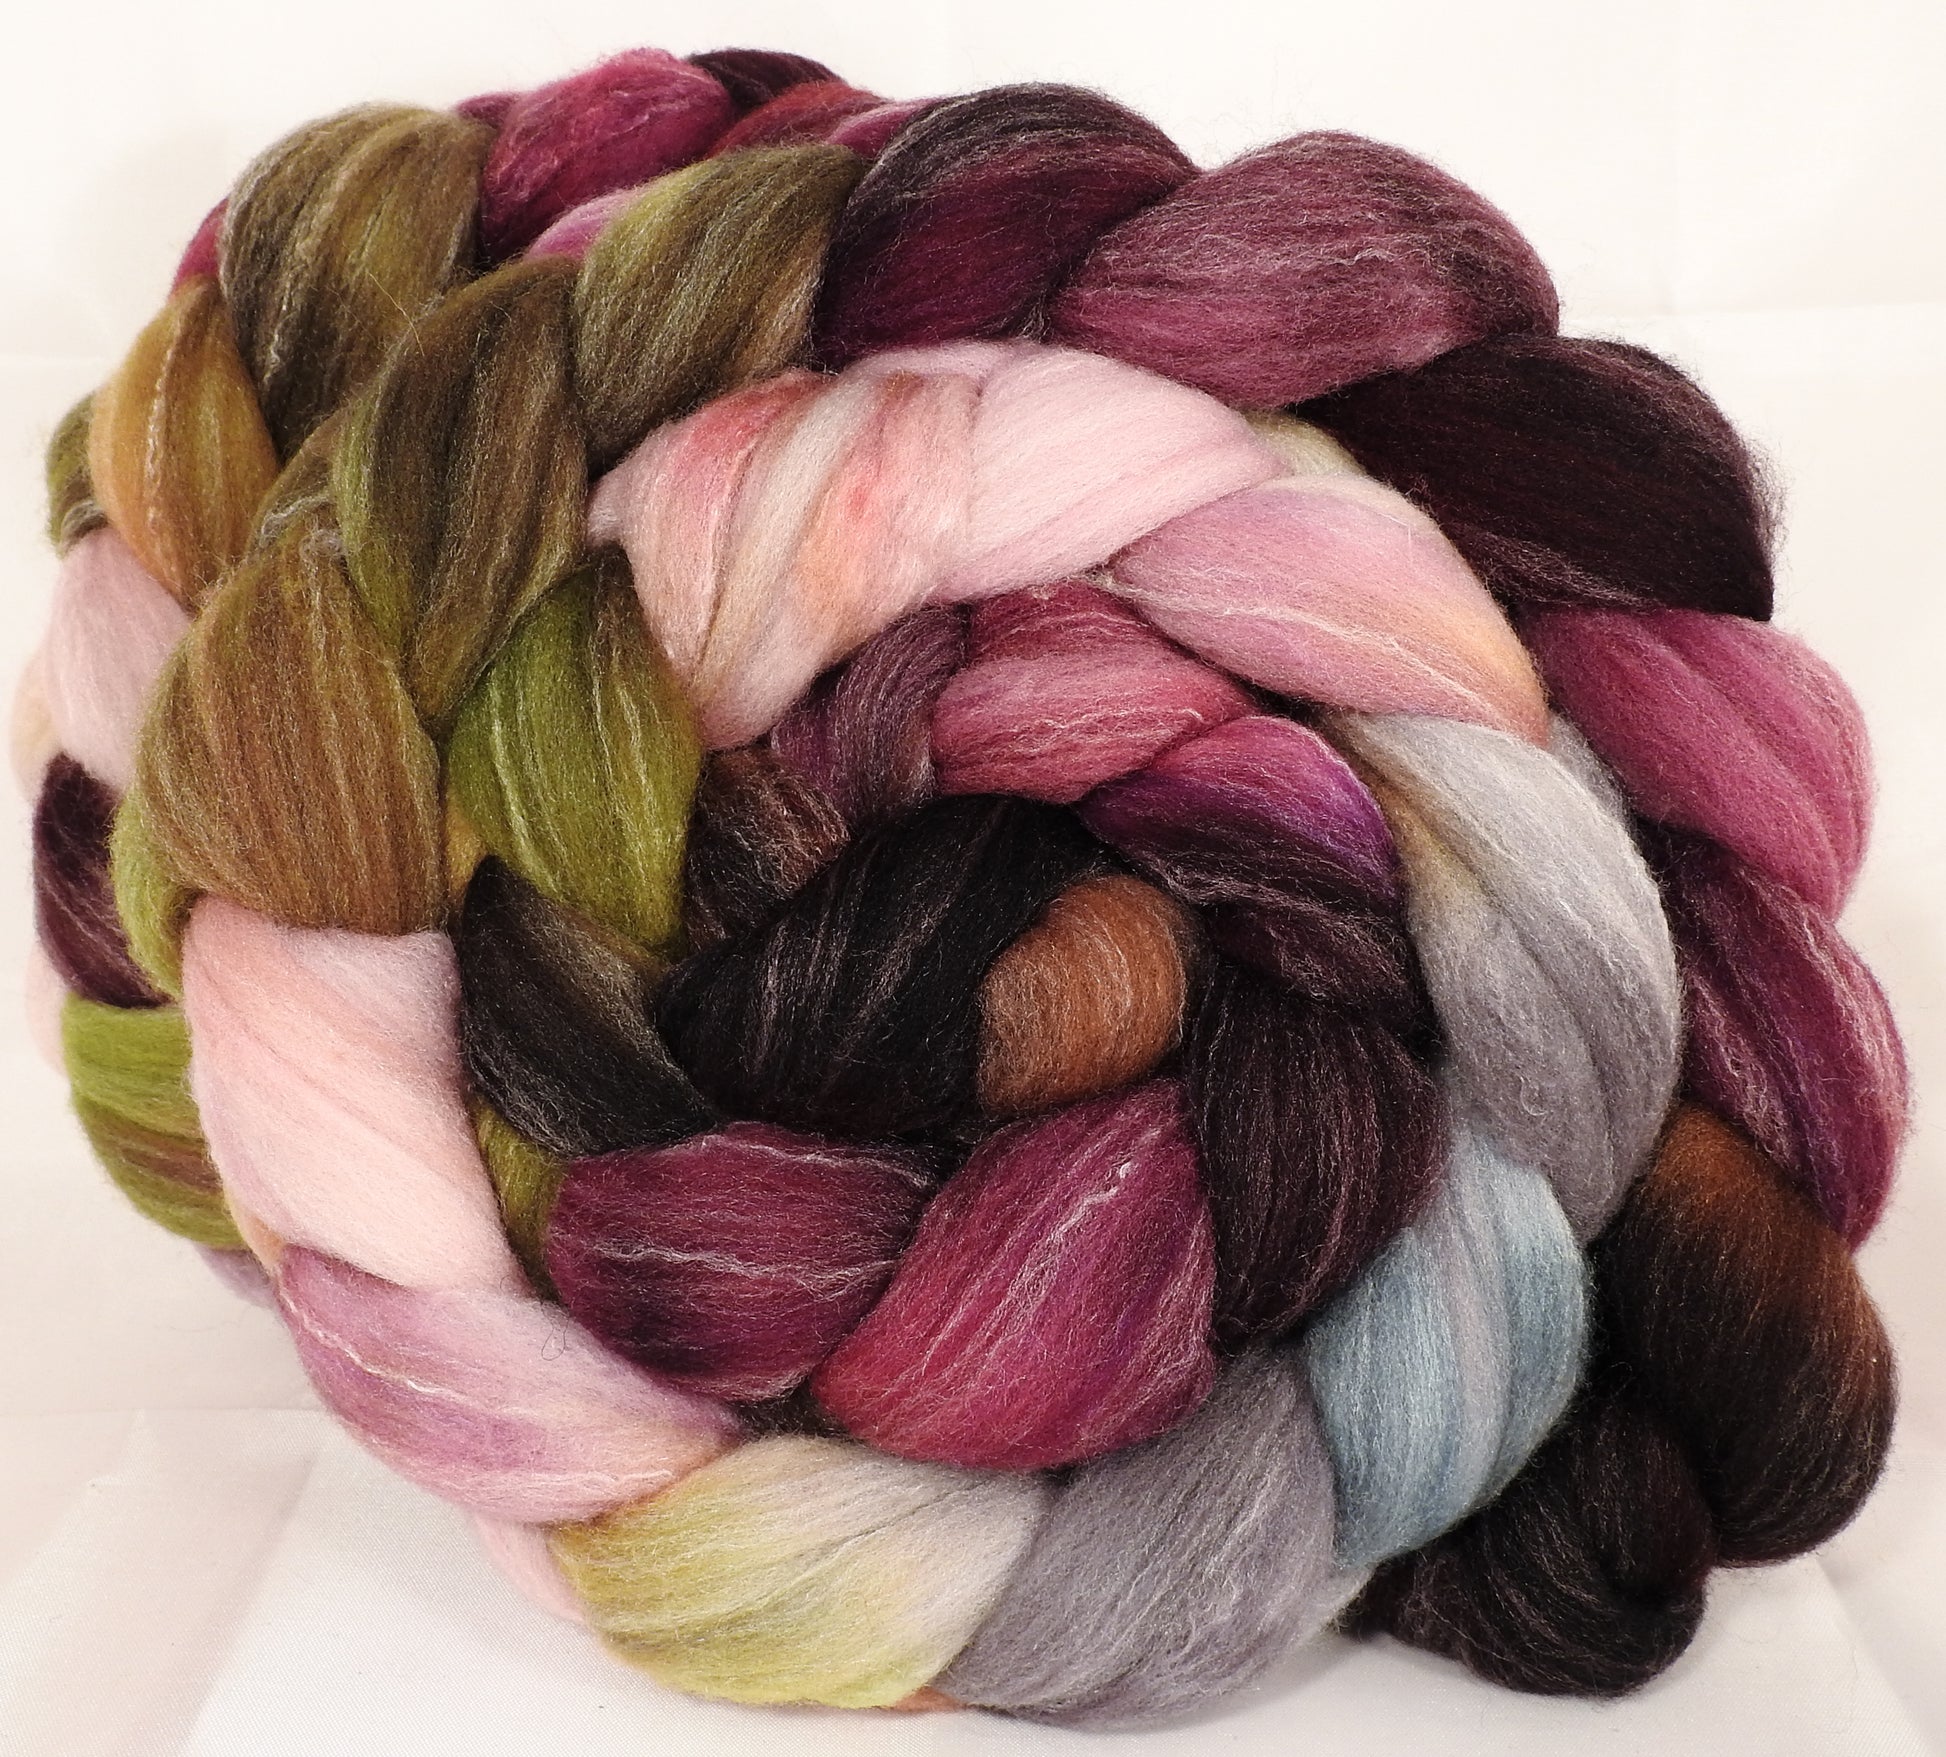 Hand dyed top for spinning - Beauty and the Beast - (5 oz.) Targhee/silk/ bamboo ( 80/10/10) - Inglenook Fibers